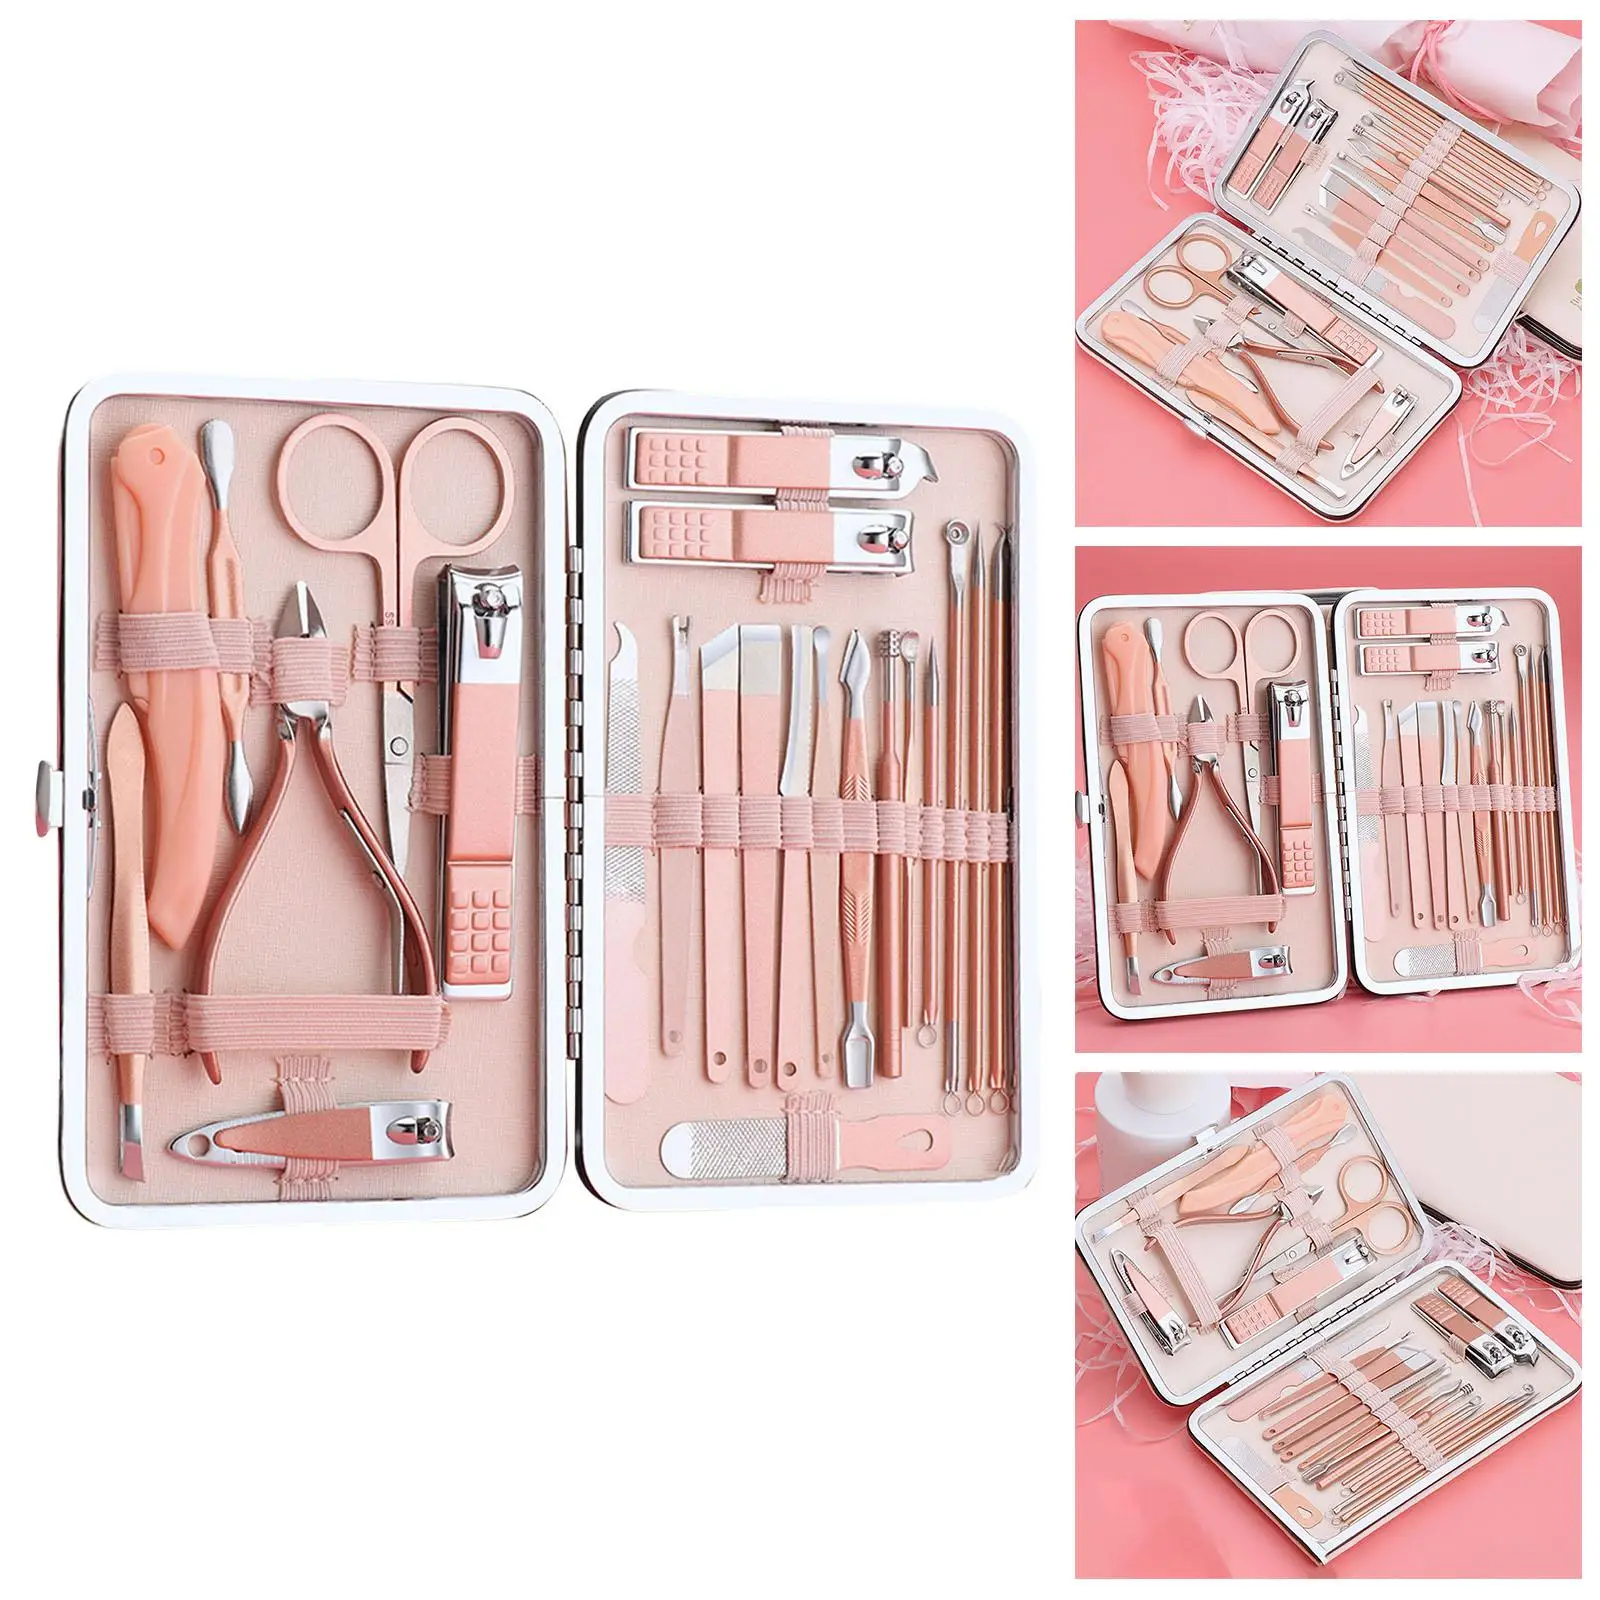 23x Manicure Nail Set Tools Pedicure Scissors for Nail Care